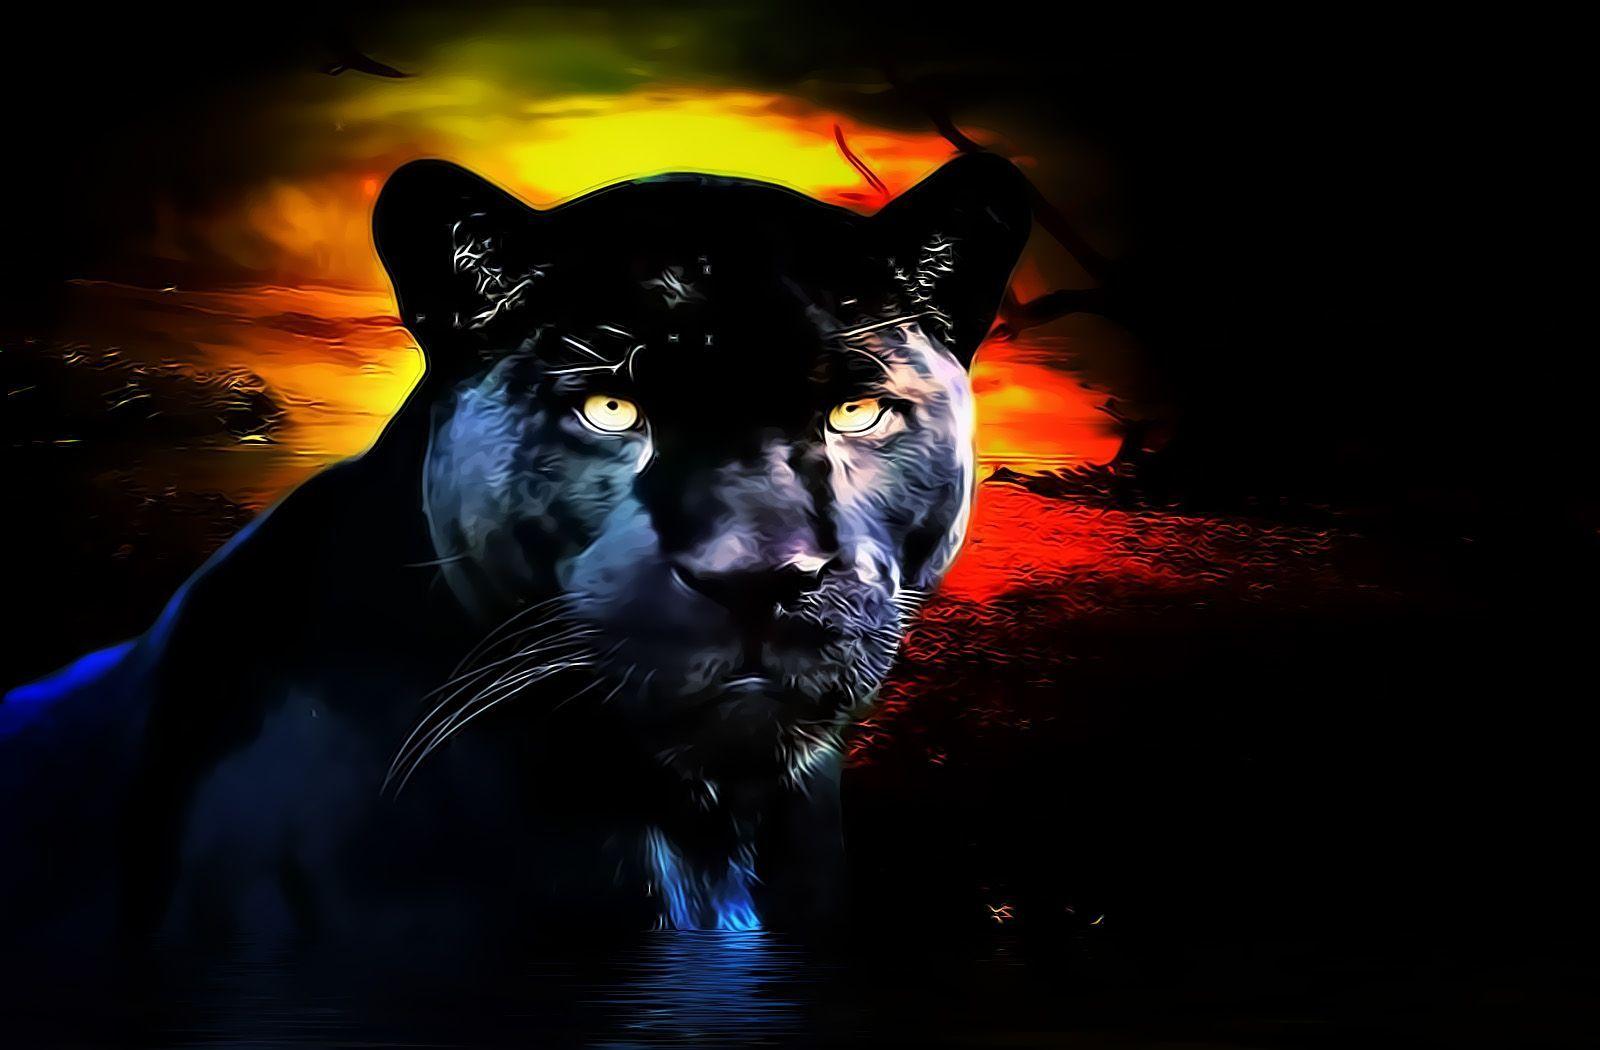 Animal Wallpaper With Black Background Http Wallpapersalbum Com Animal Wallpaper With Black Background Html In 2020 Jaguar Animal Animal Wallpaper Black Panther Cat